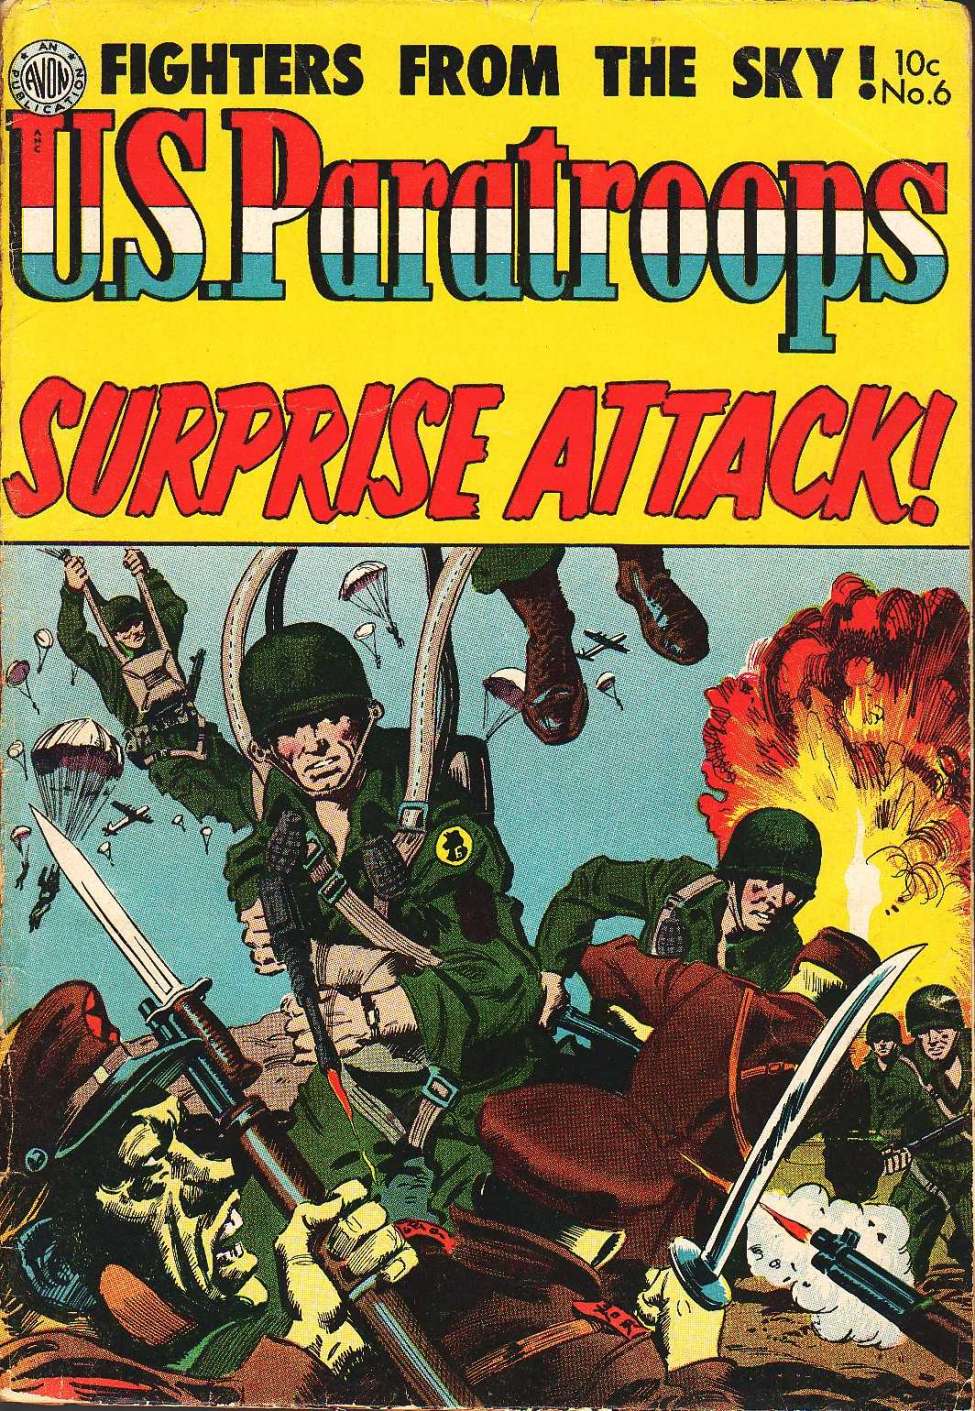 Comic Book Cover For U.S. Paratroops 6